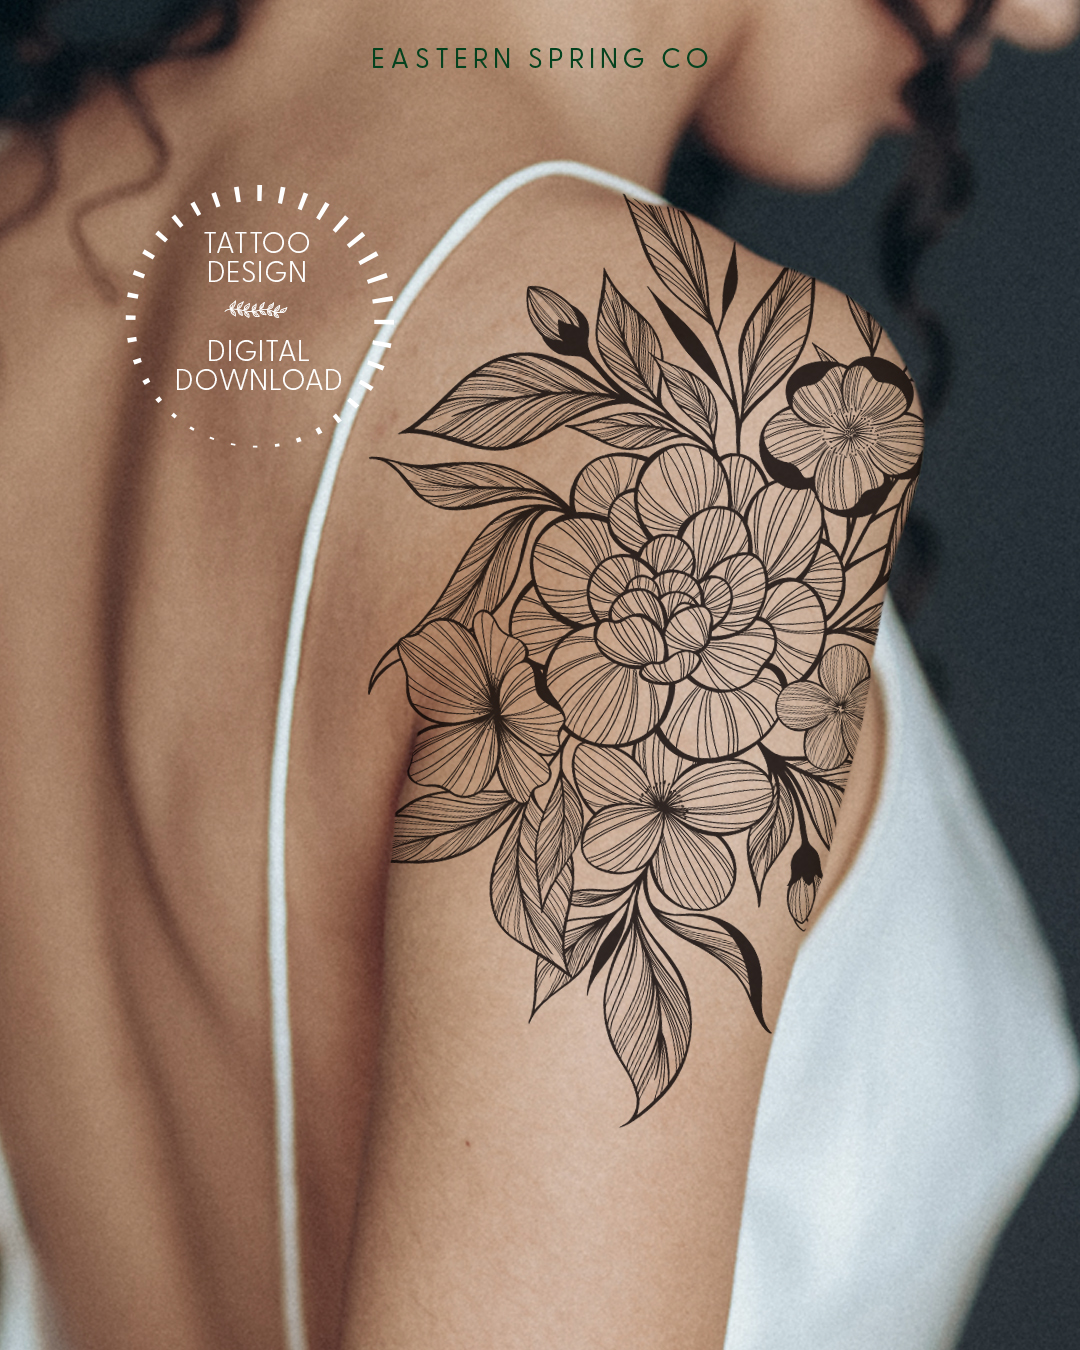 Eastern Spring Co artistic tattoo design, Spring Blooming